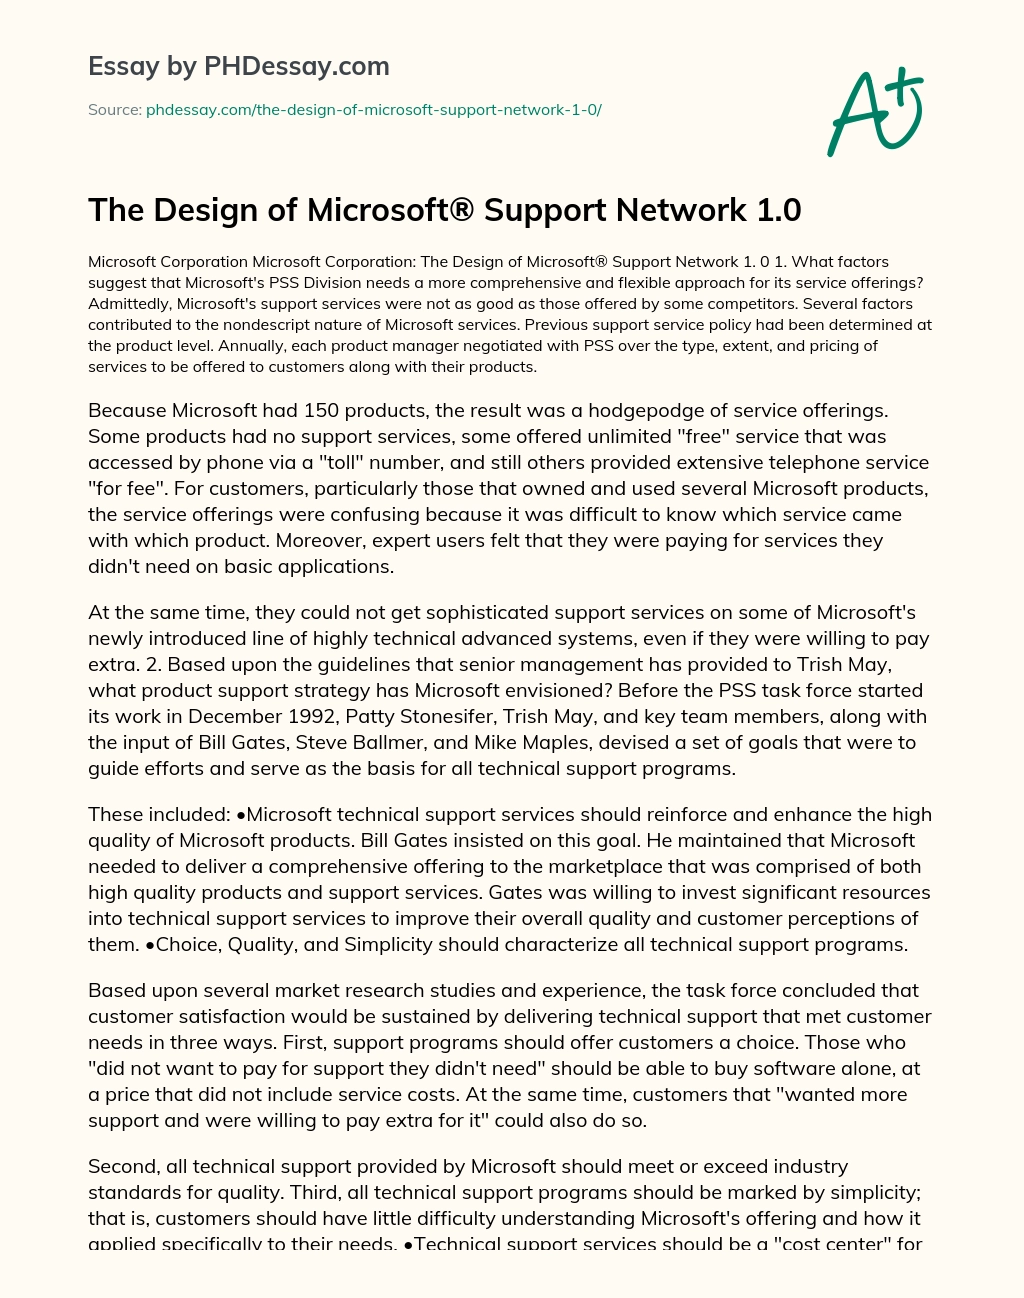 The Design of Microsoft® Support Network 1.0 essay